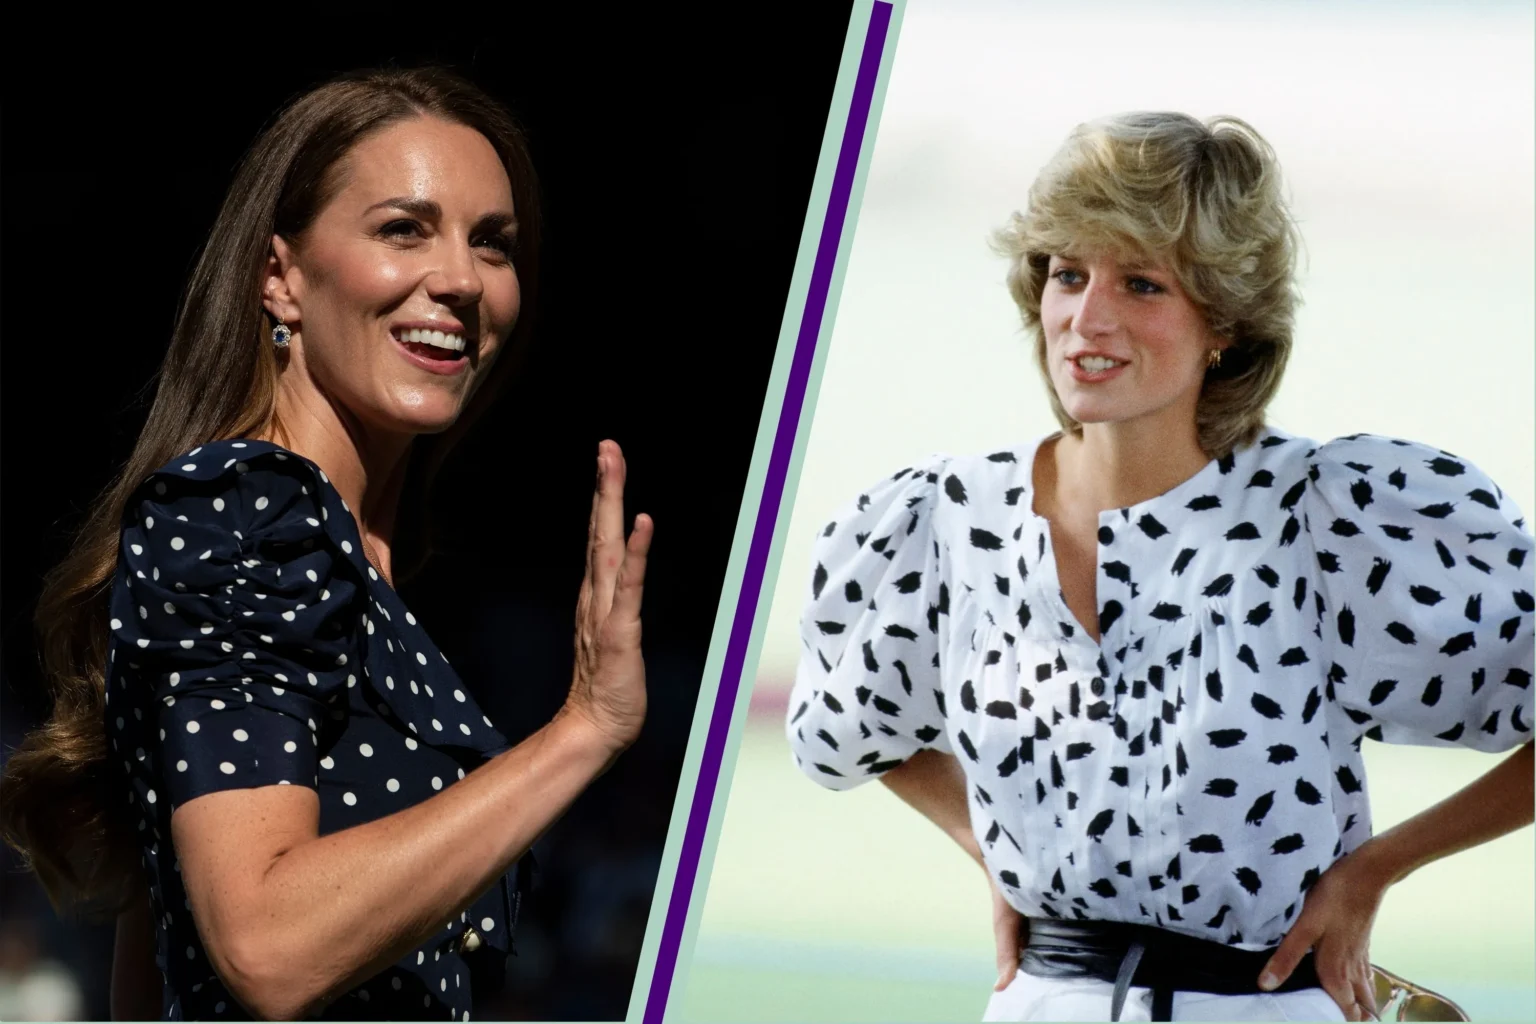 kate-middleton-is-far-away-from-princess-diana-when-it-comes-to-show-courage